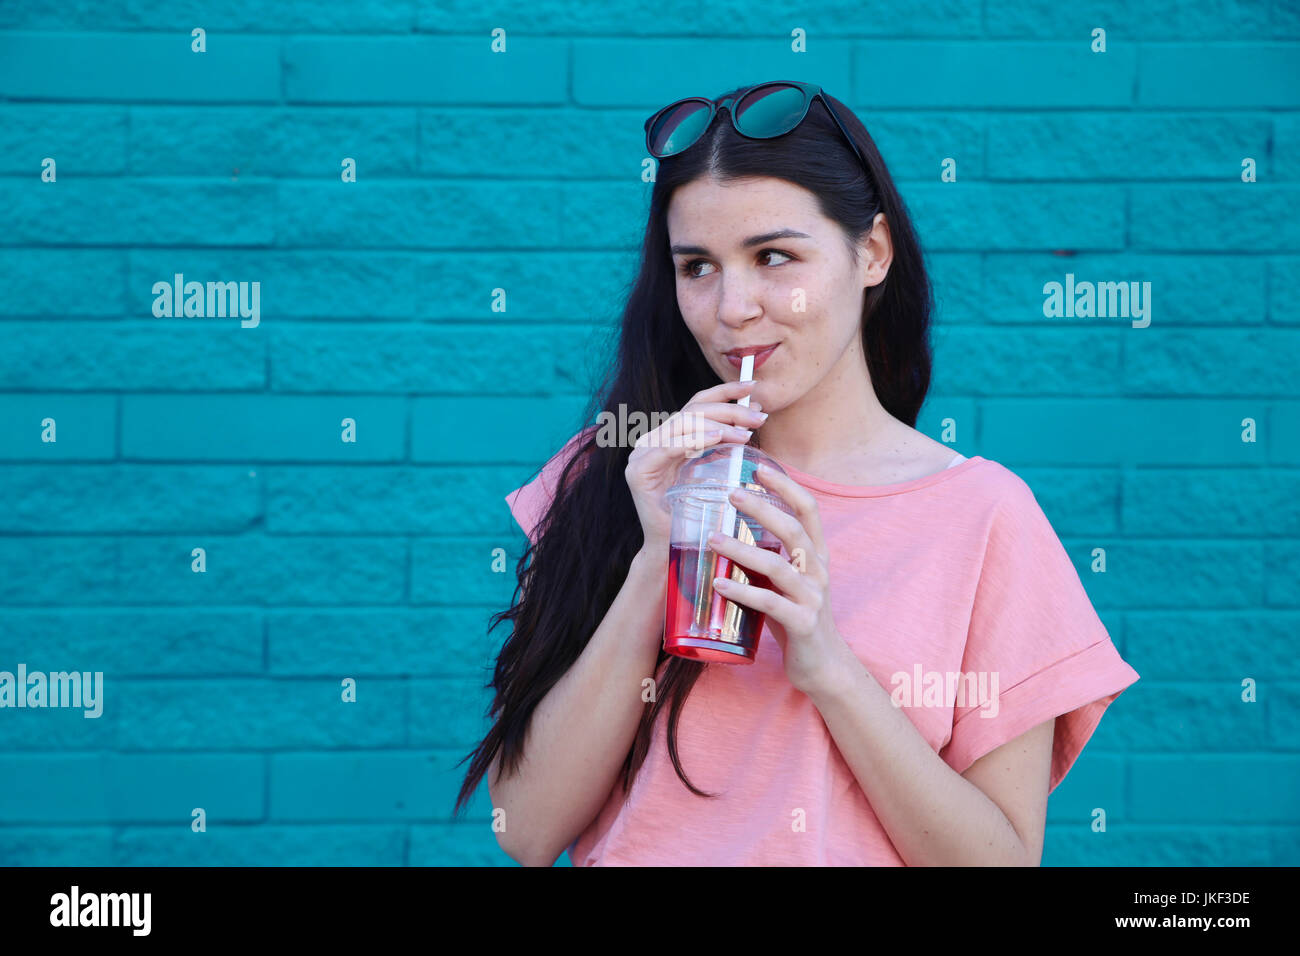 Portrait of young woman drinking soft drink Stock Photo